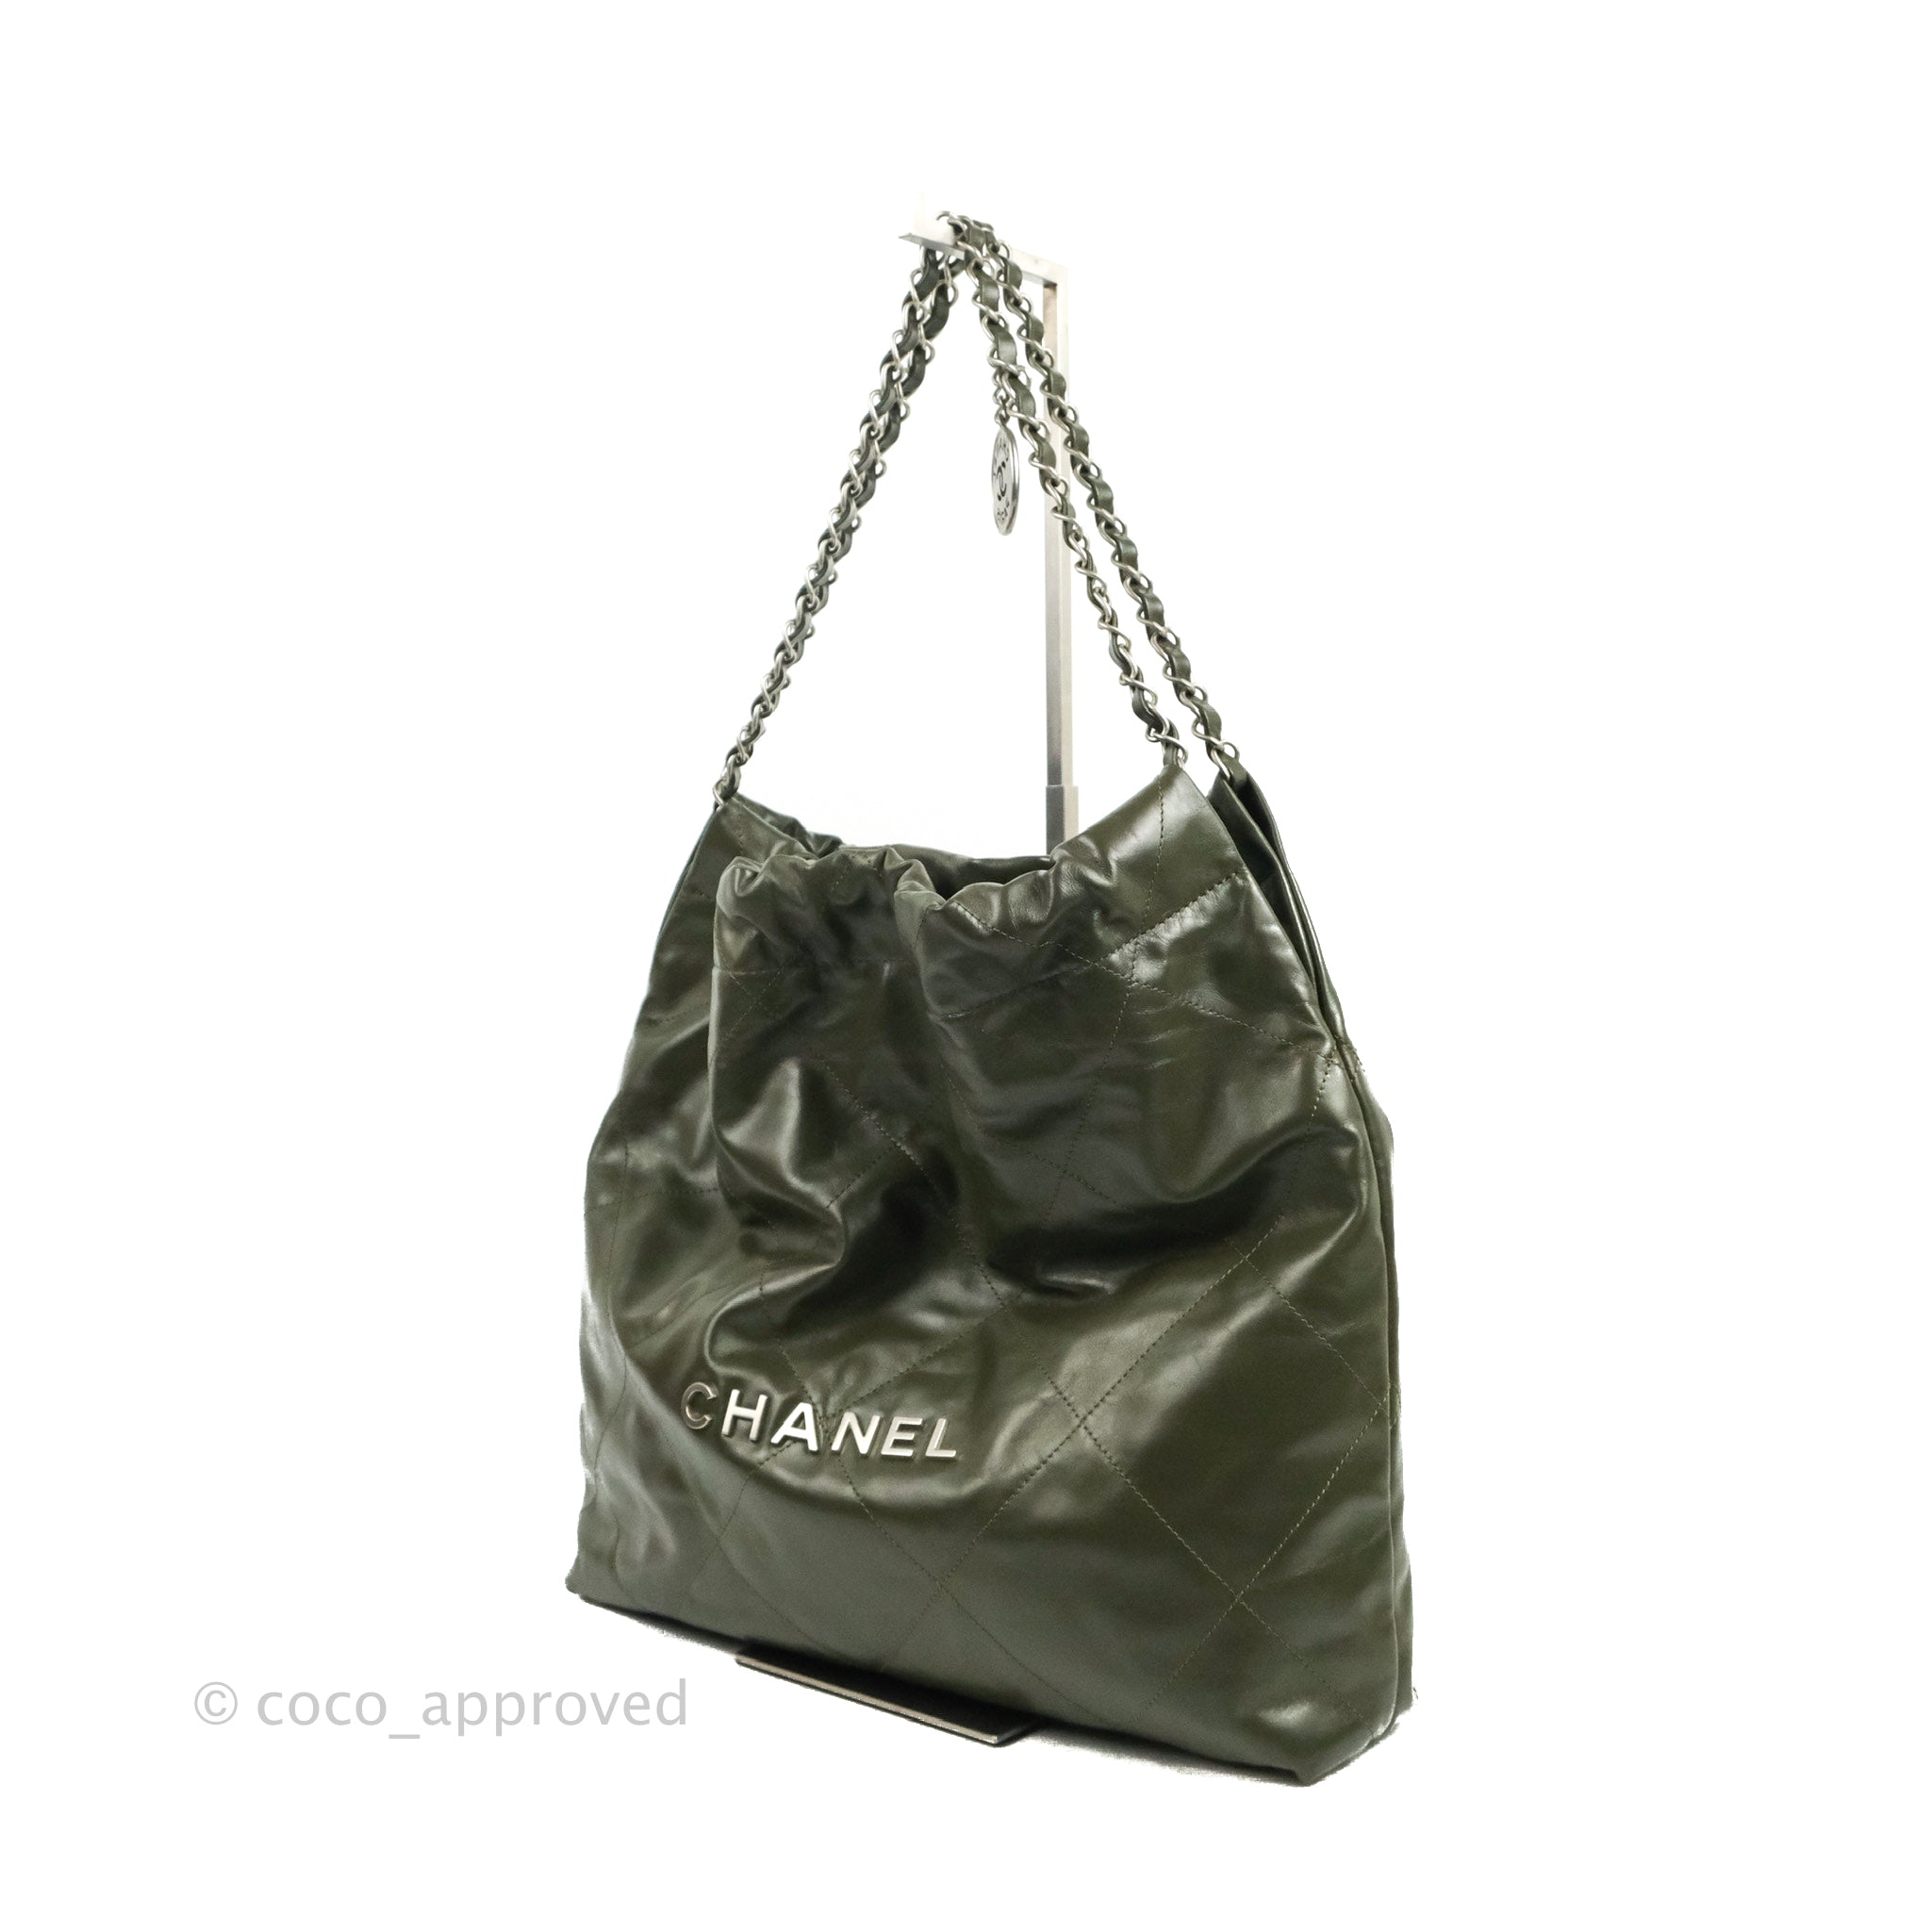 Chanel 22 small, green calf leather